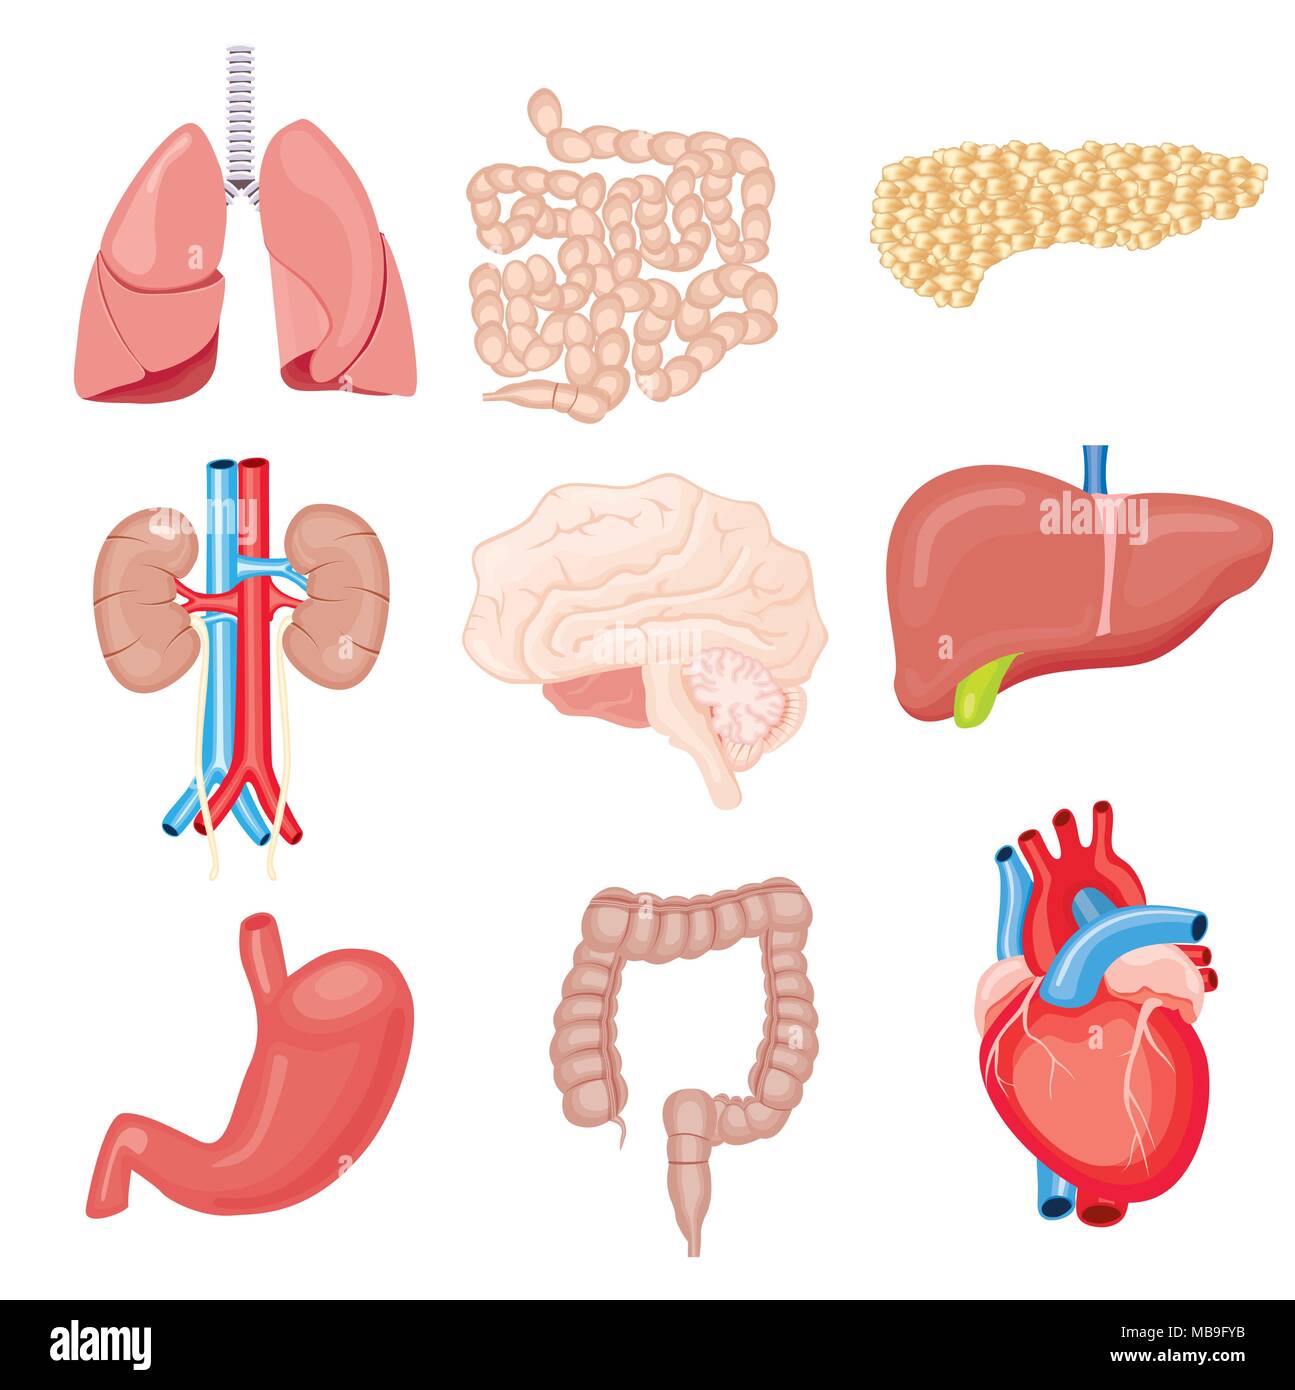 Human Internal Organs Isolated on White. Vector Illustration. Set with Heart Intestines Kidneys Stomach Lungs Brain Liver Pancreas. Stock Vector